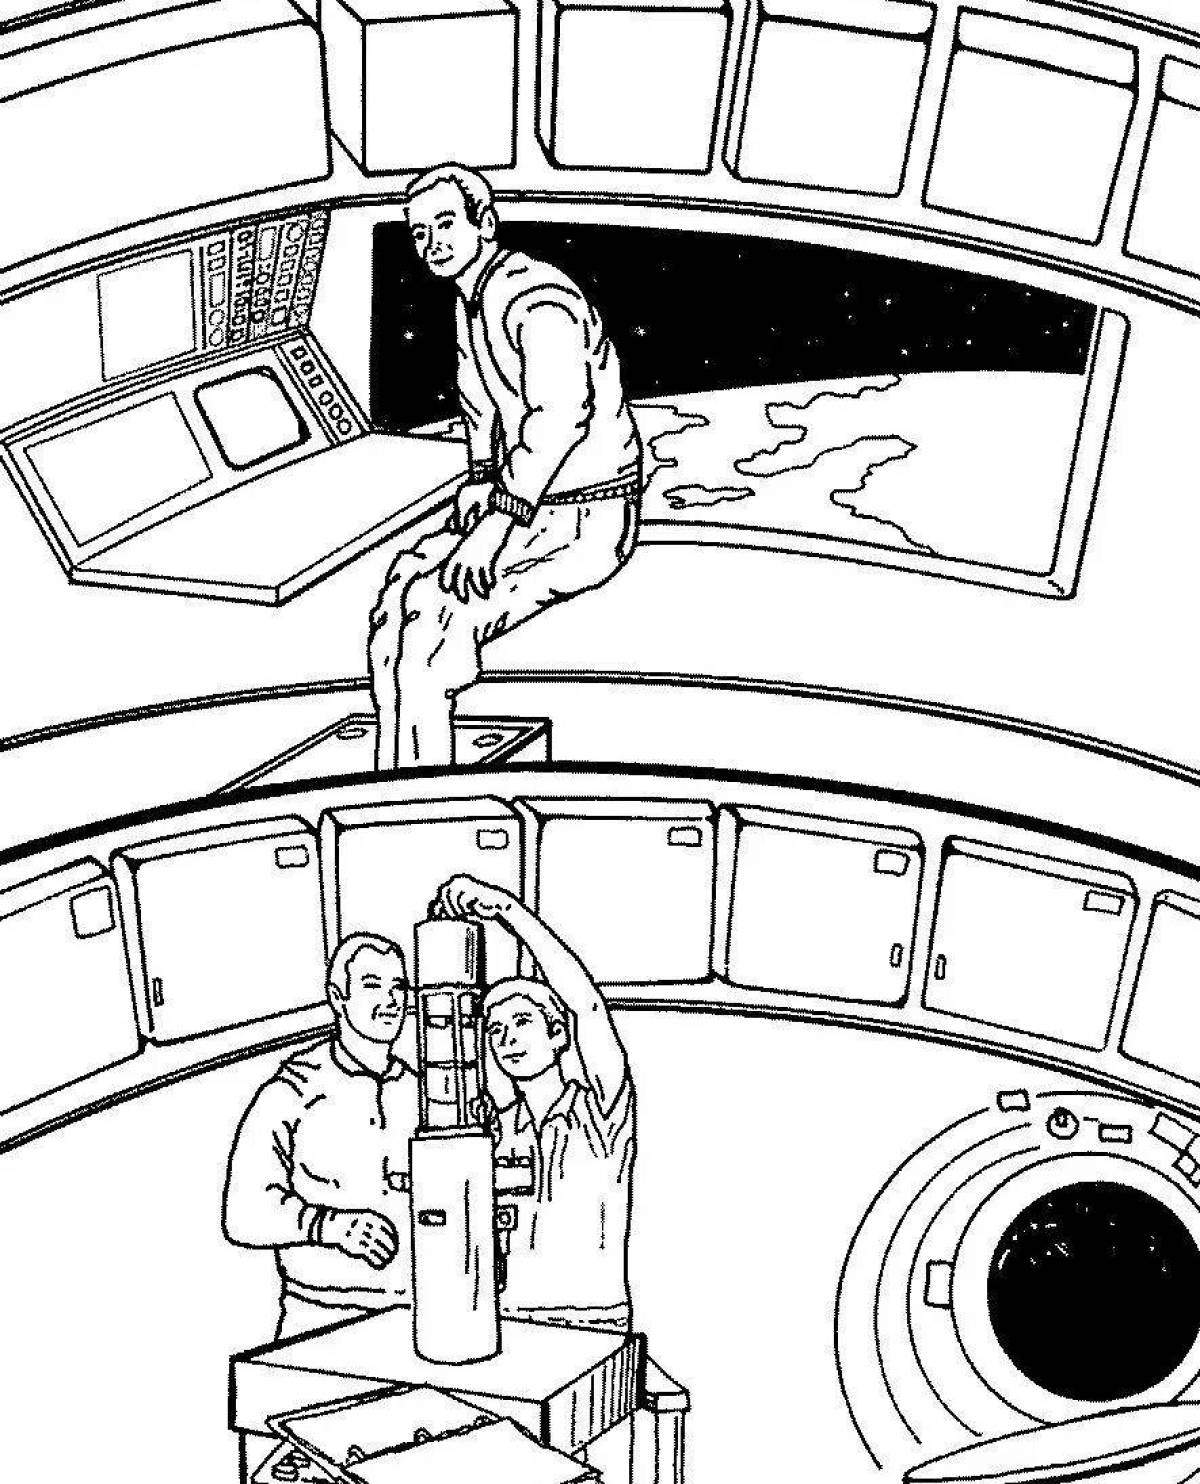 Exquisite space station coloring page